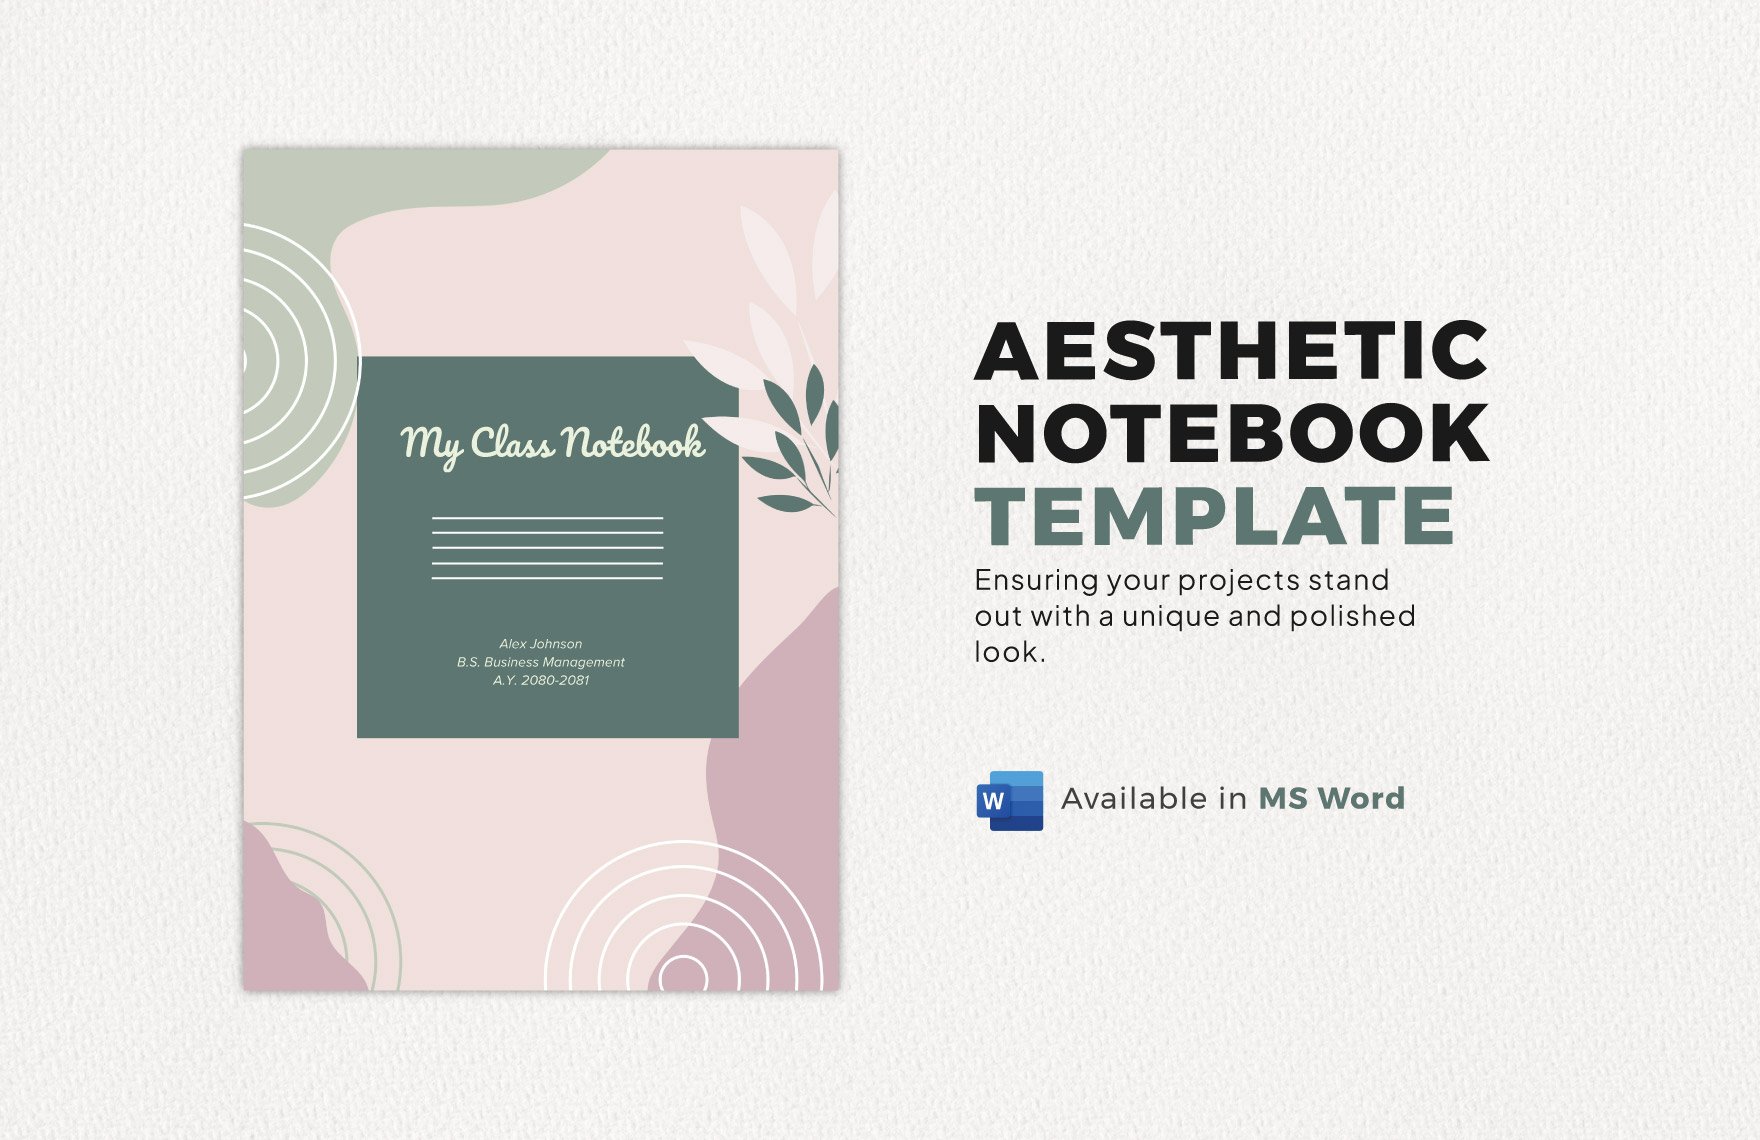 Aesthetic Notebook Template in Word